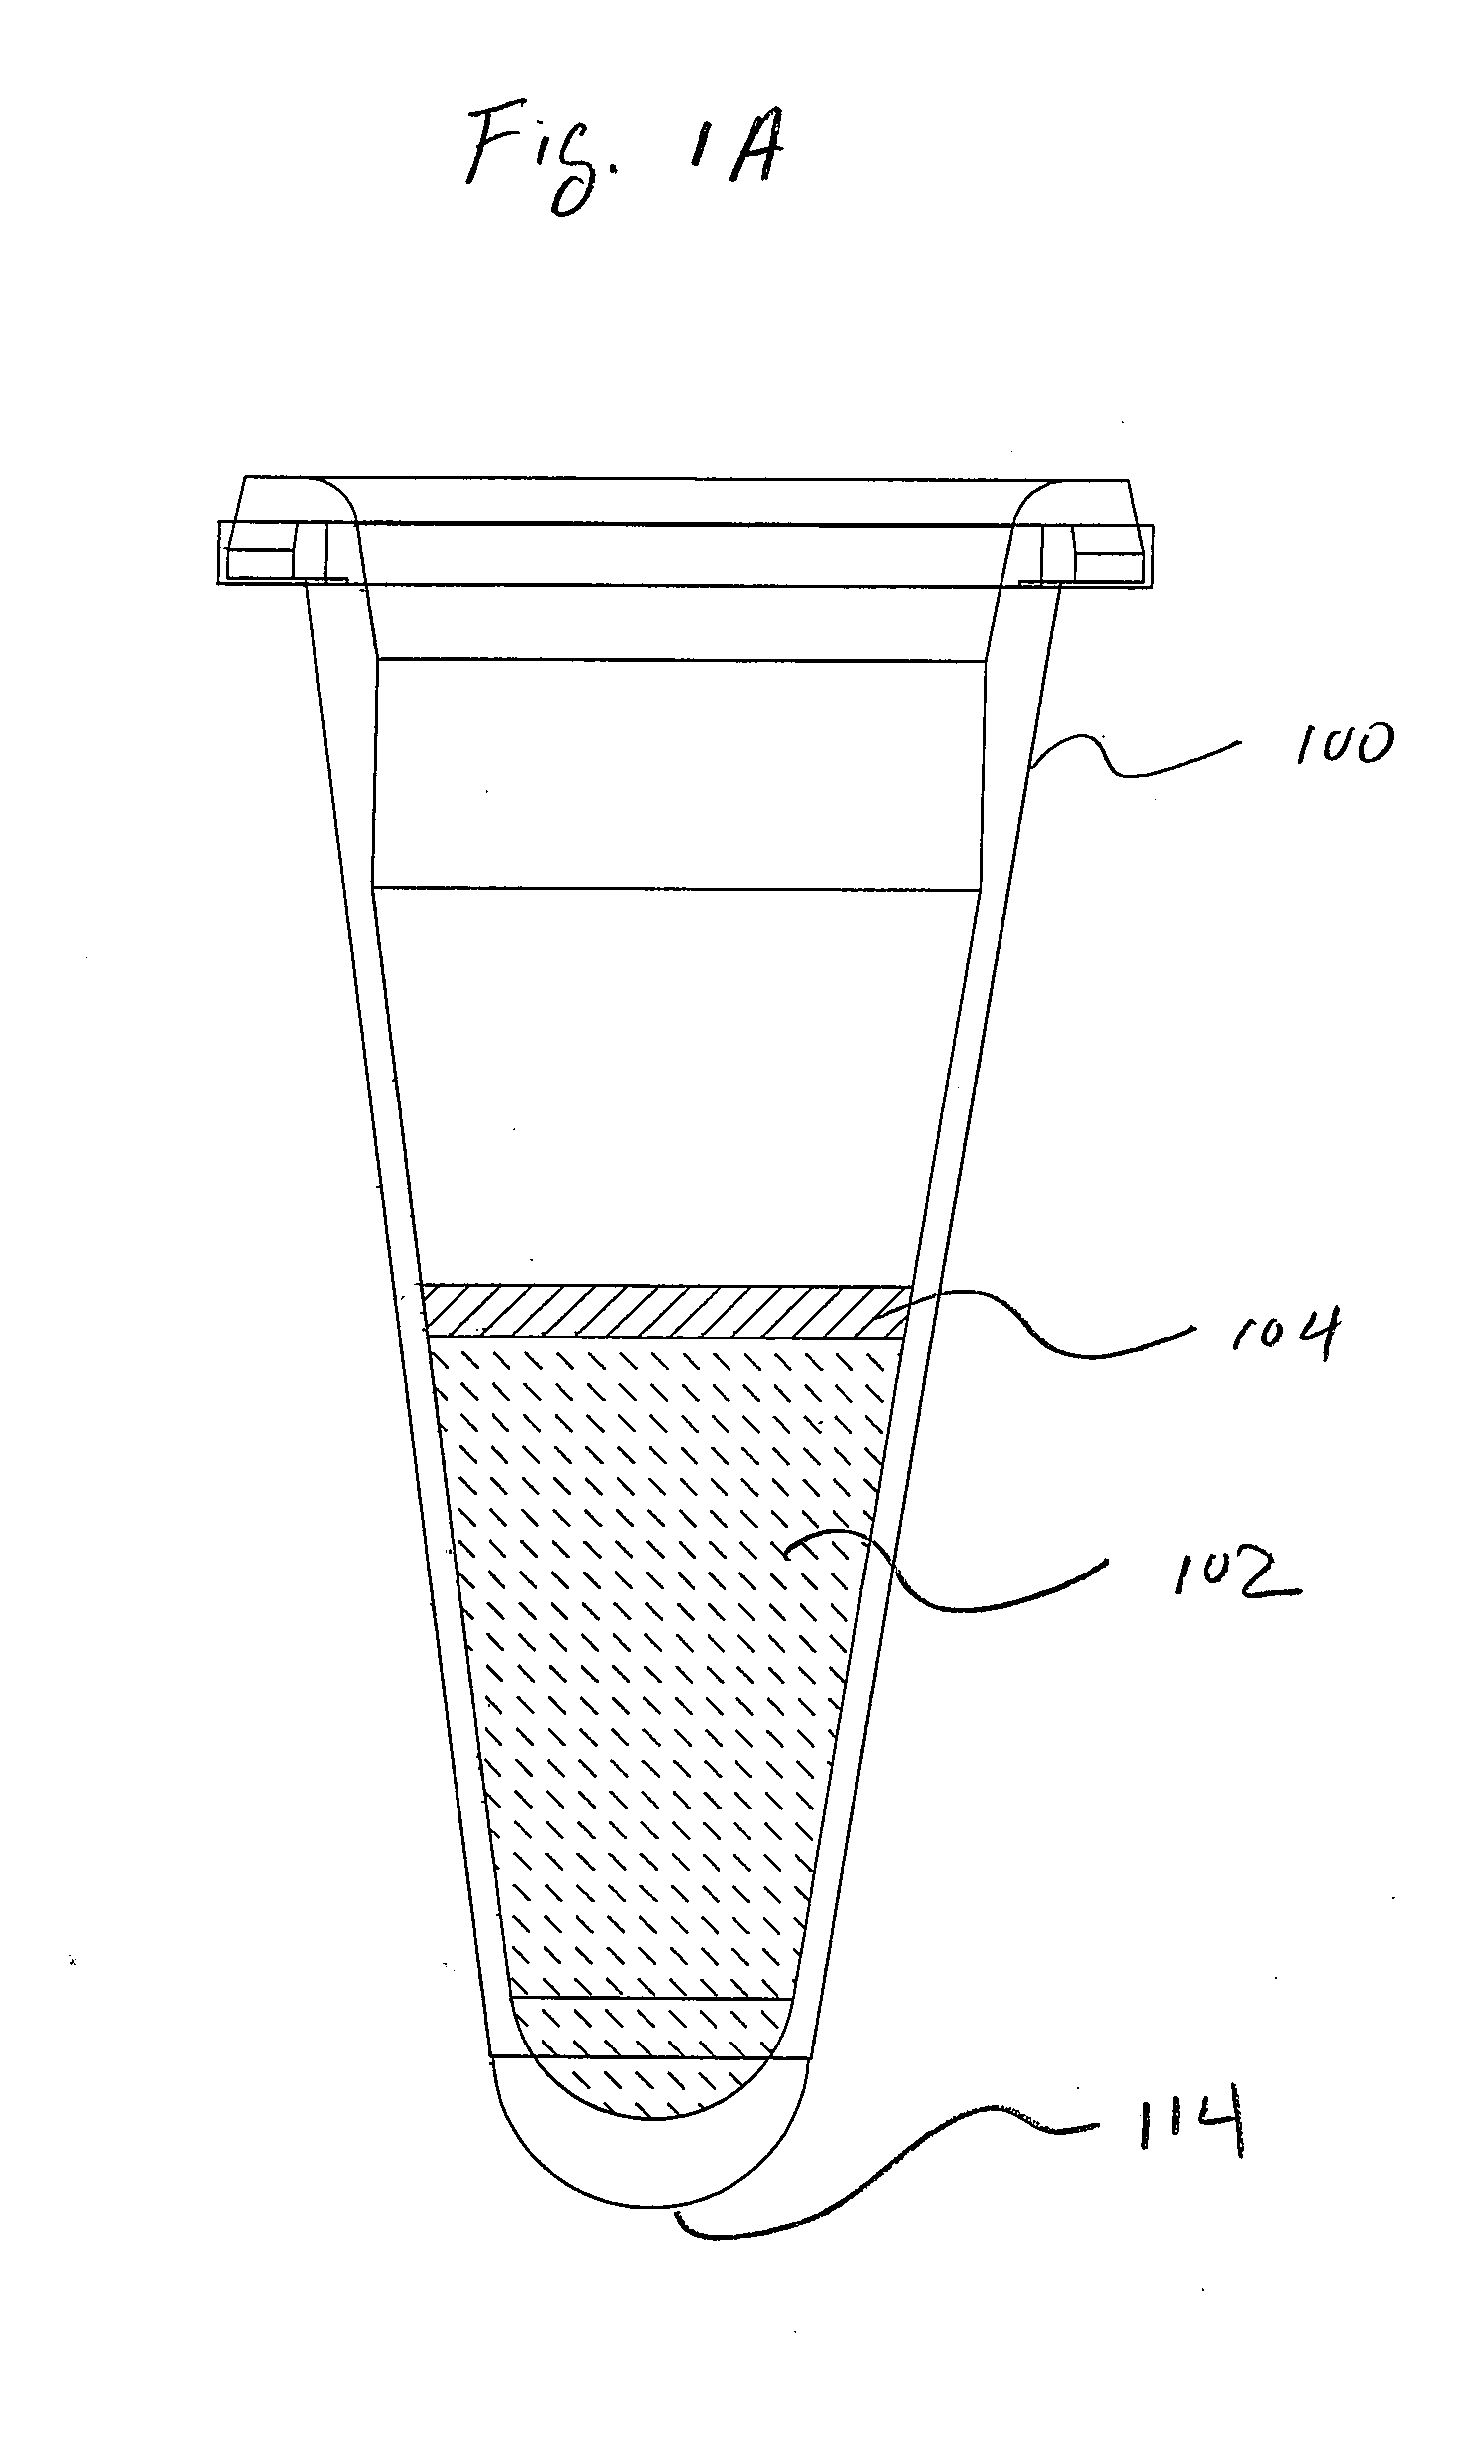 Thermocycler seal composition, method, and application